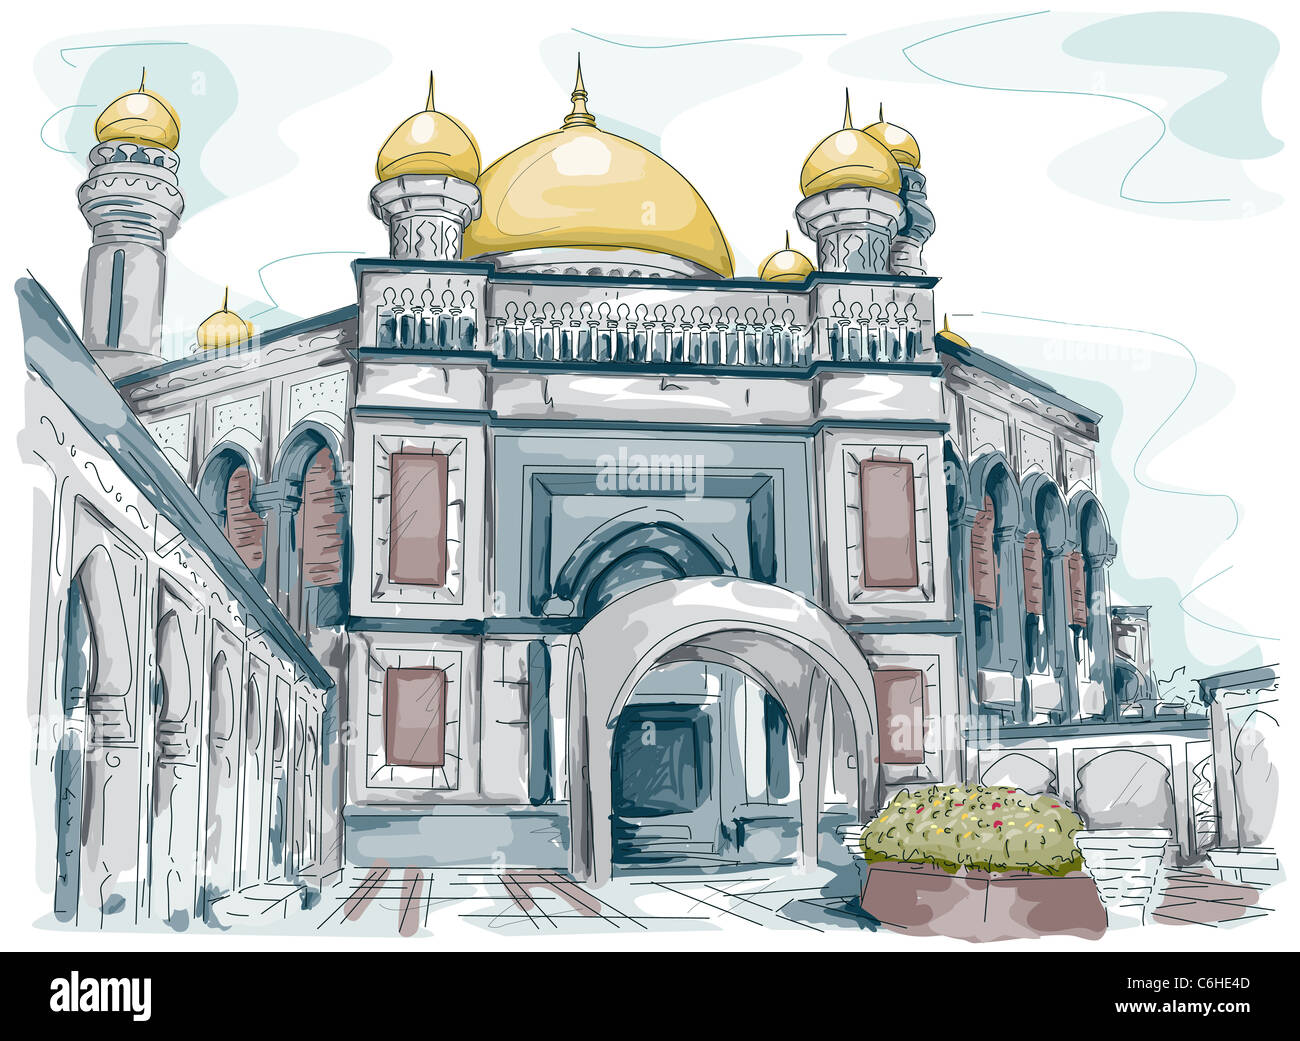 Sketch of a Mosque in Brunei Stock Photo